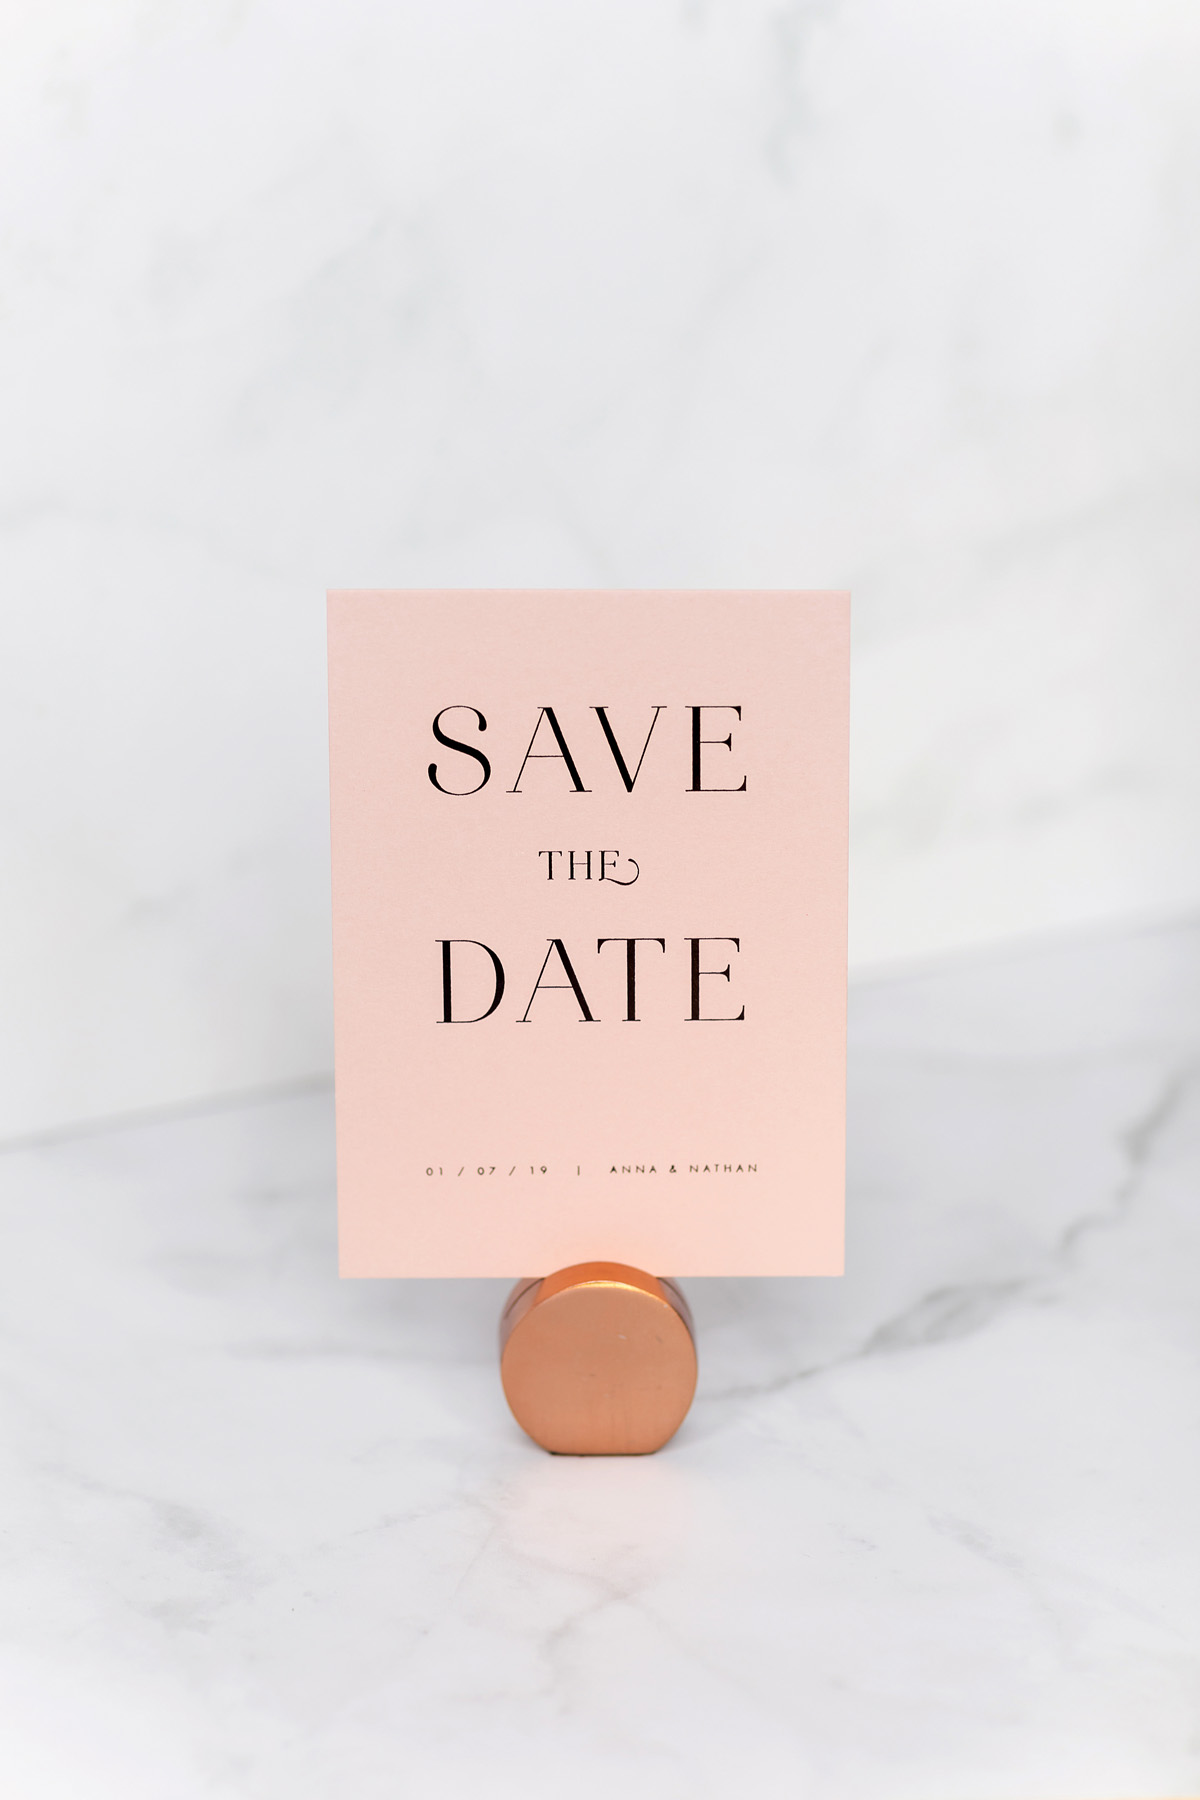 23.Save The Date EYI Love Wedding Stationery